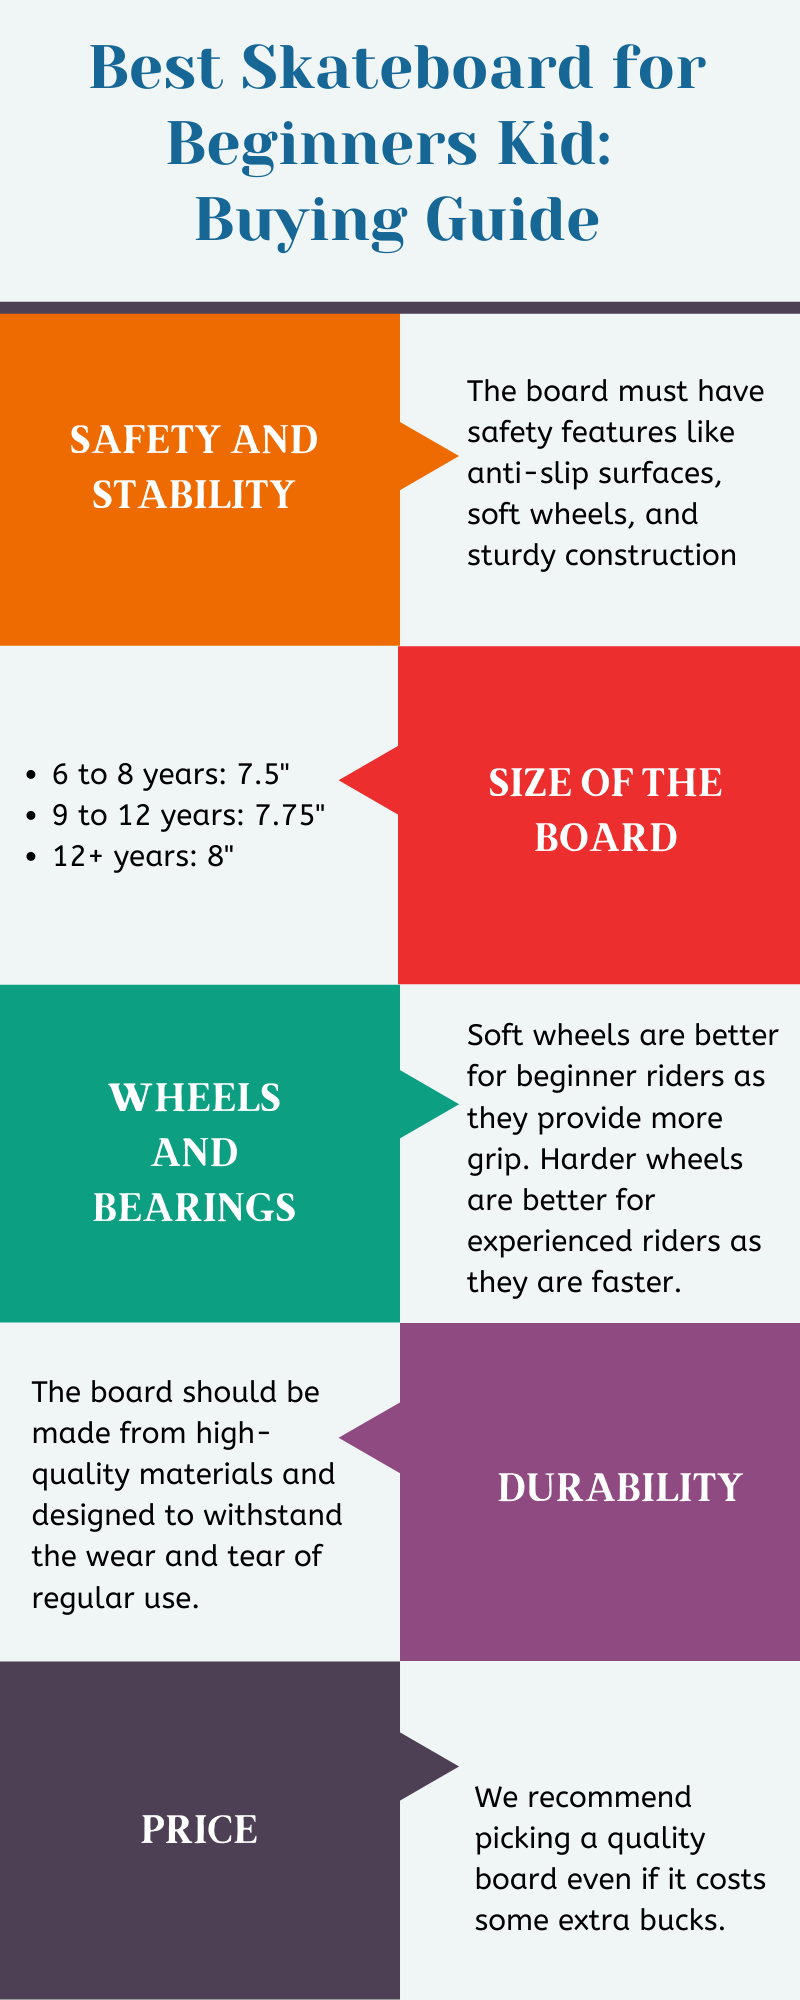 Best Skateboard for Beginners Kid – A Guide For Parents